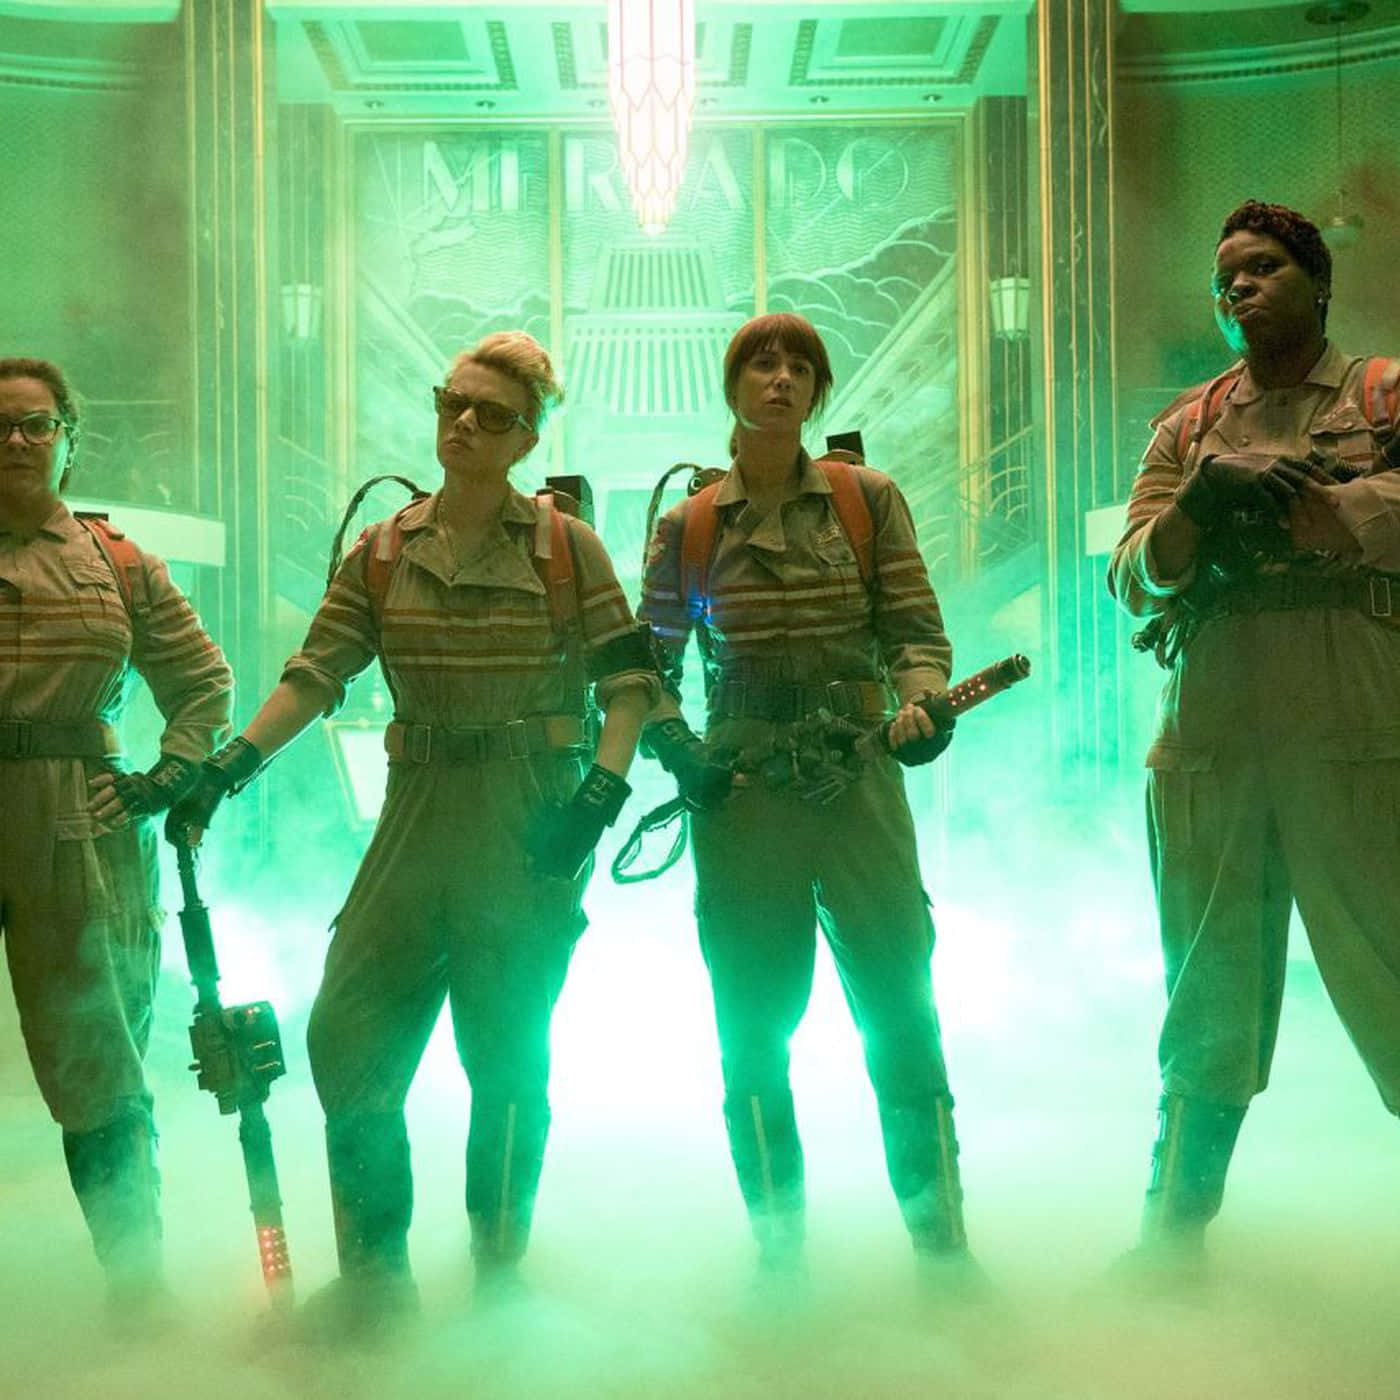 Ghostbusters Team Ready for Action